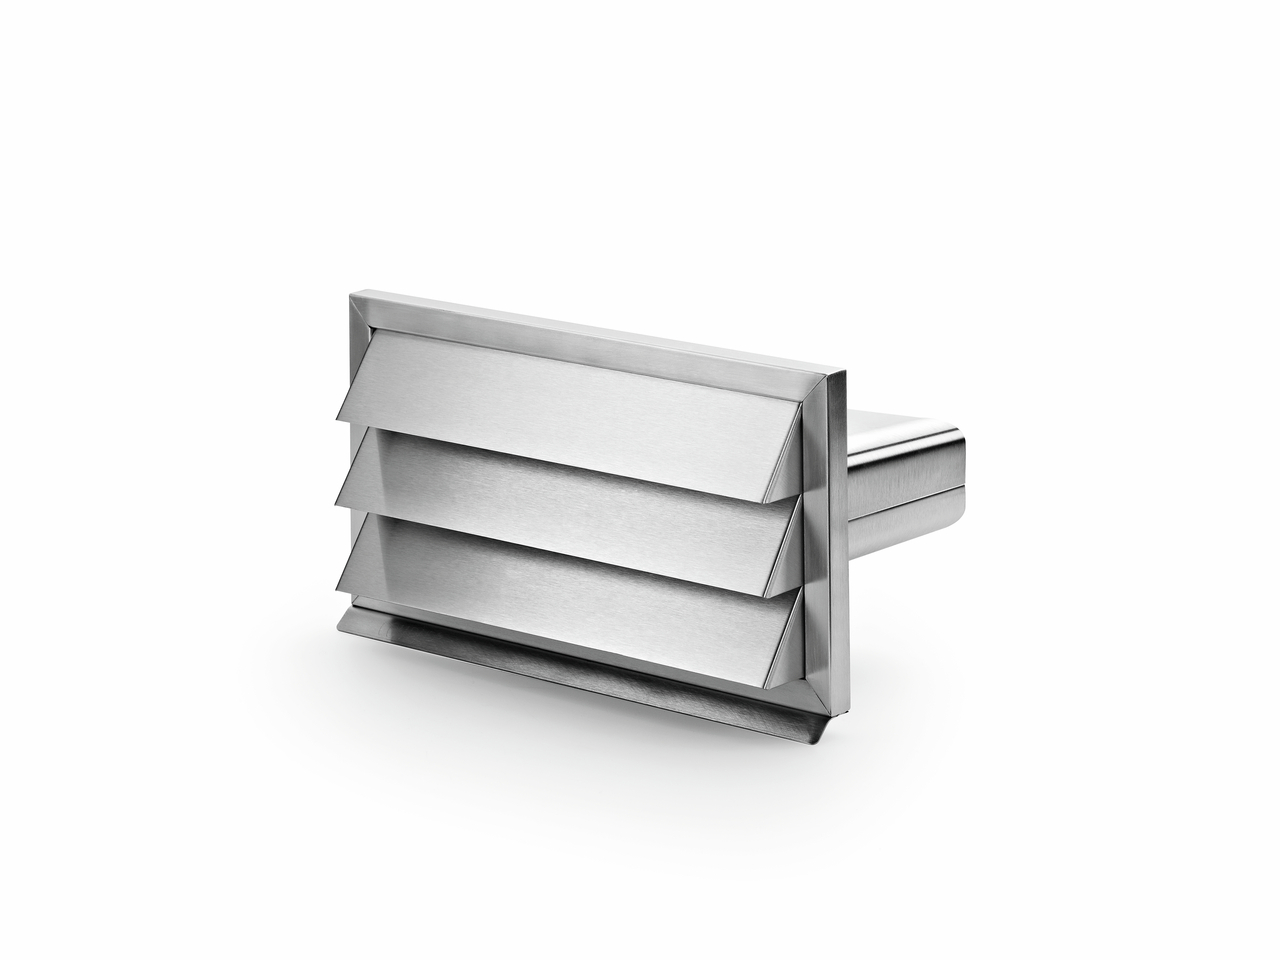  E-Jal top external blind, stainless steel